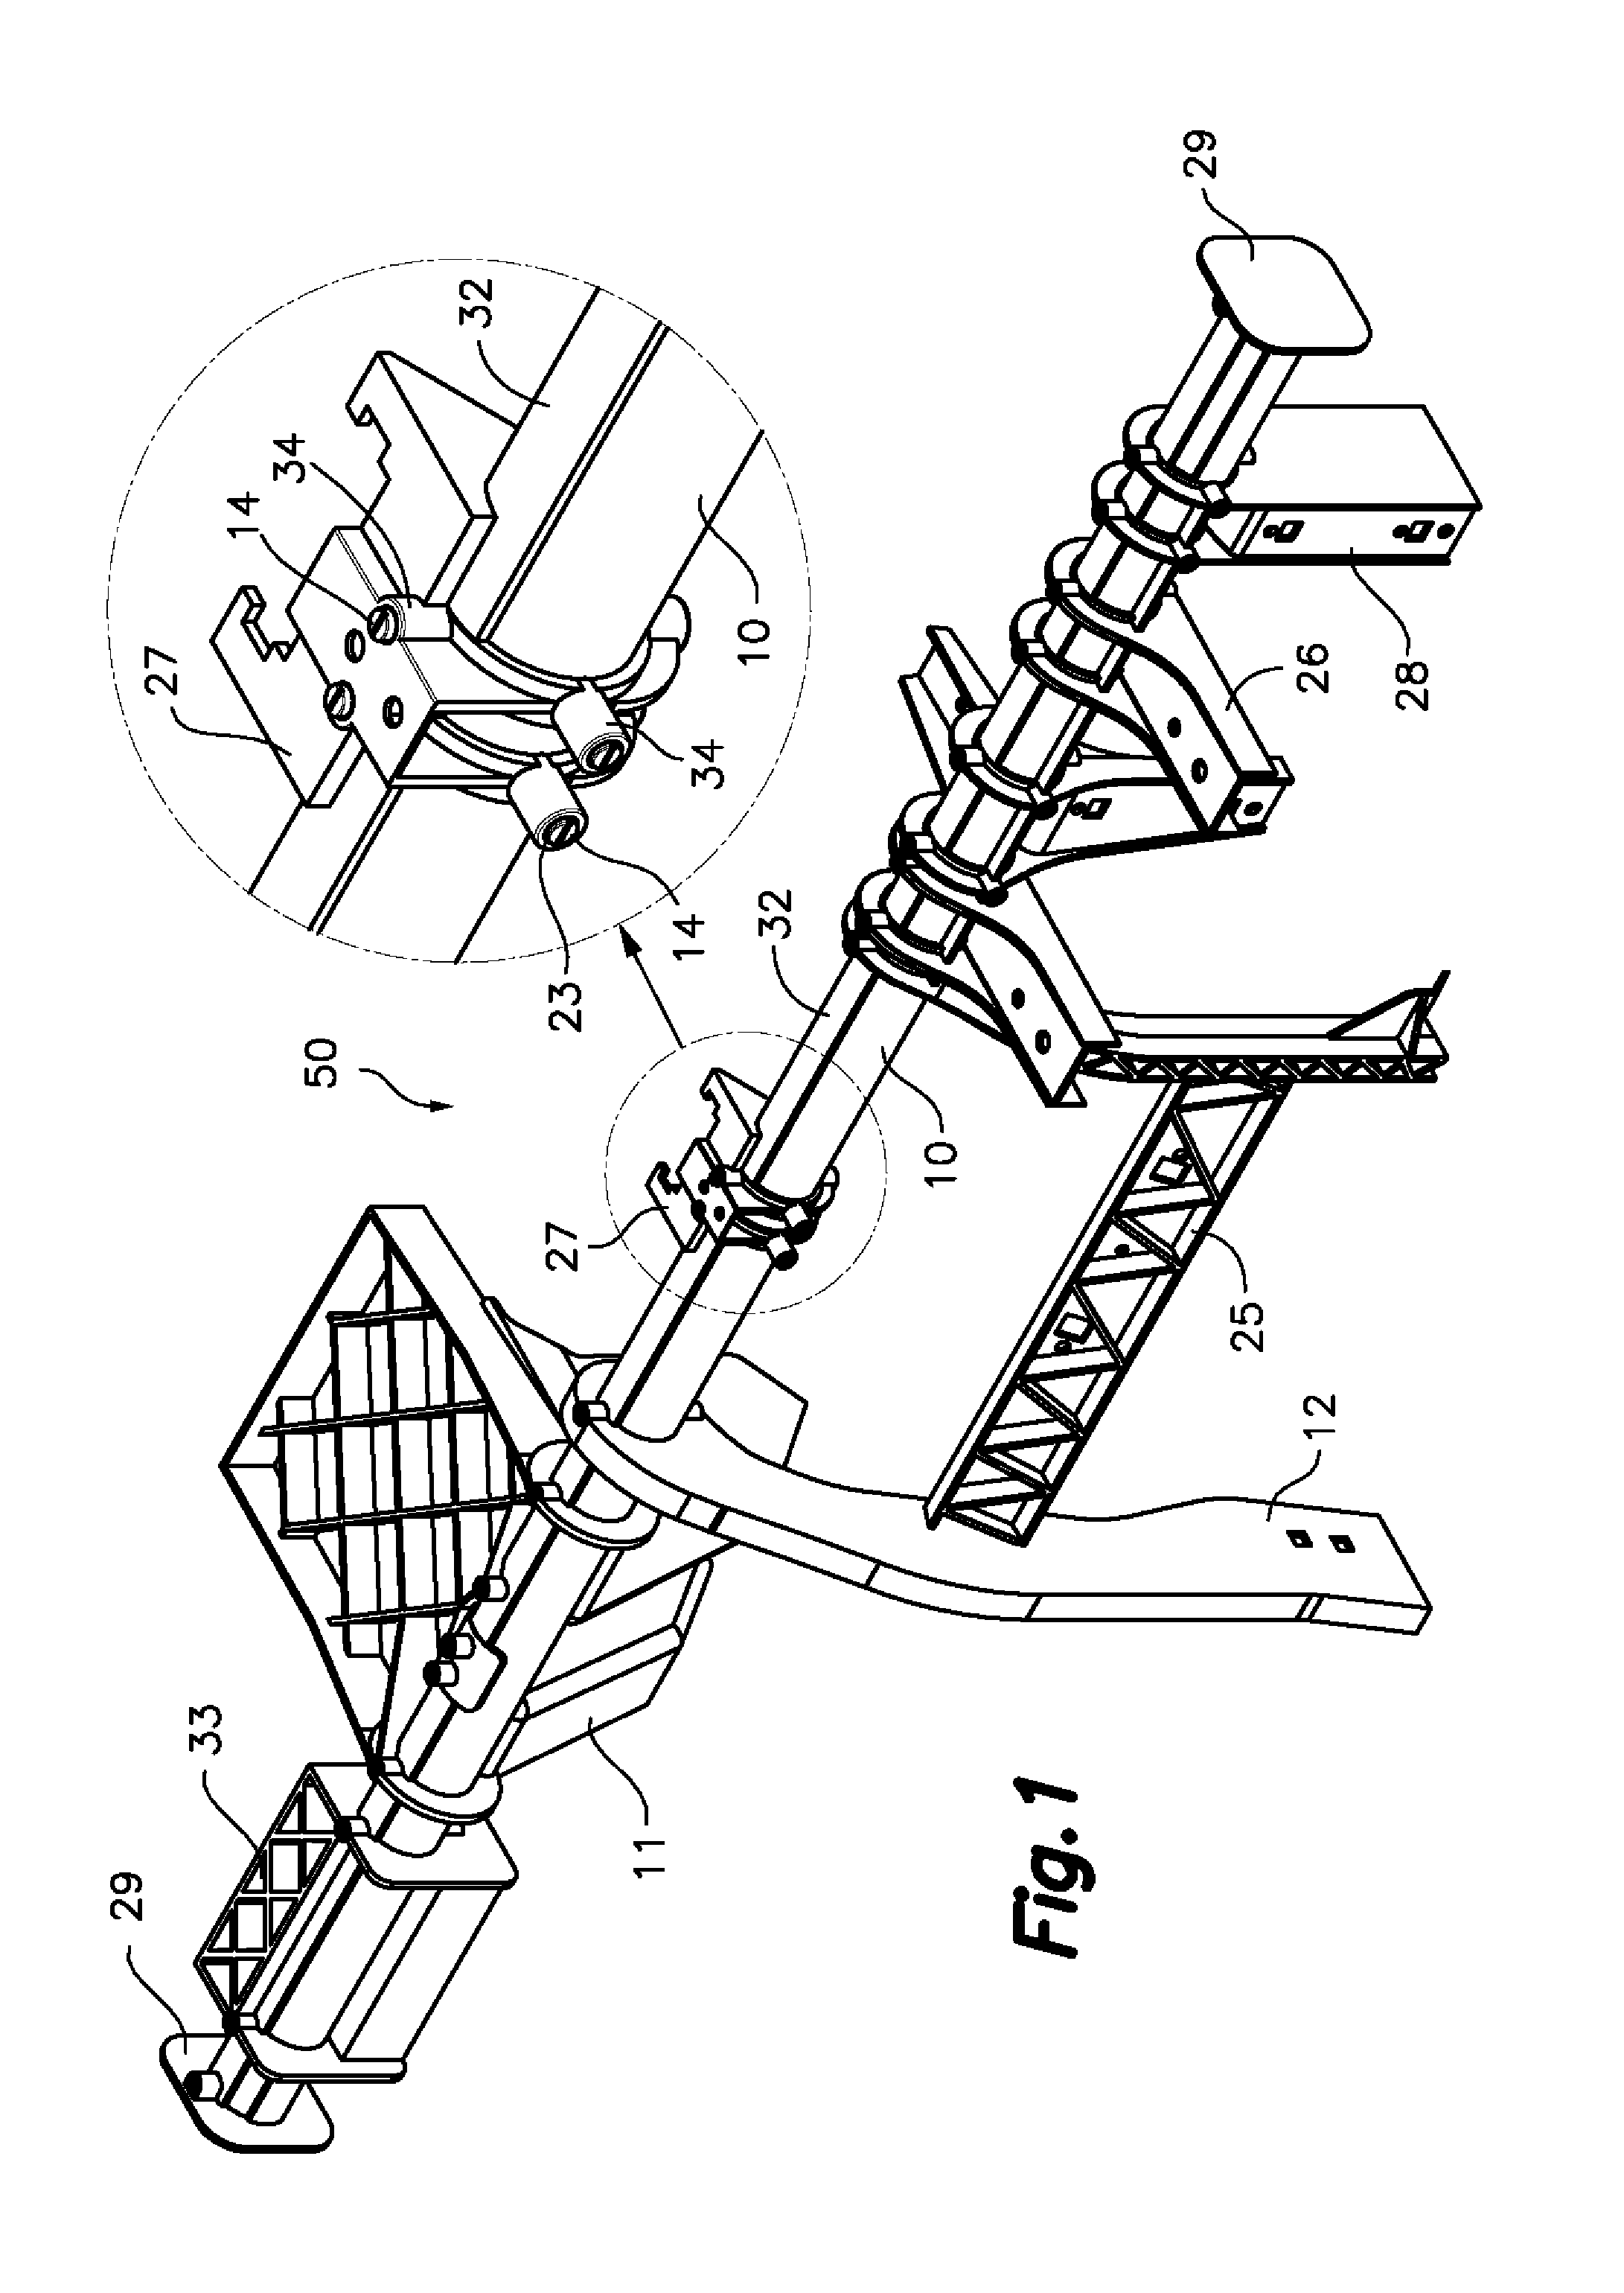 Metal-plastic hybrid support structure applicable to a dashboard support of a vehicle